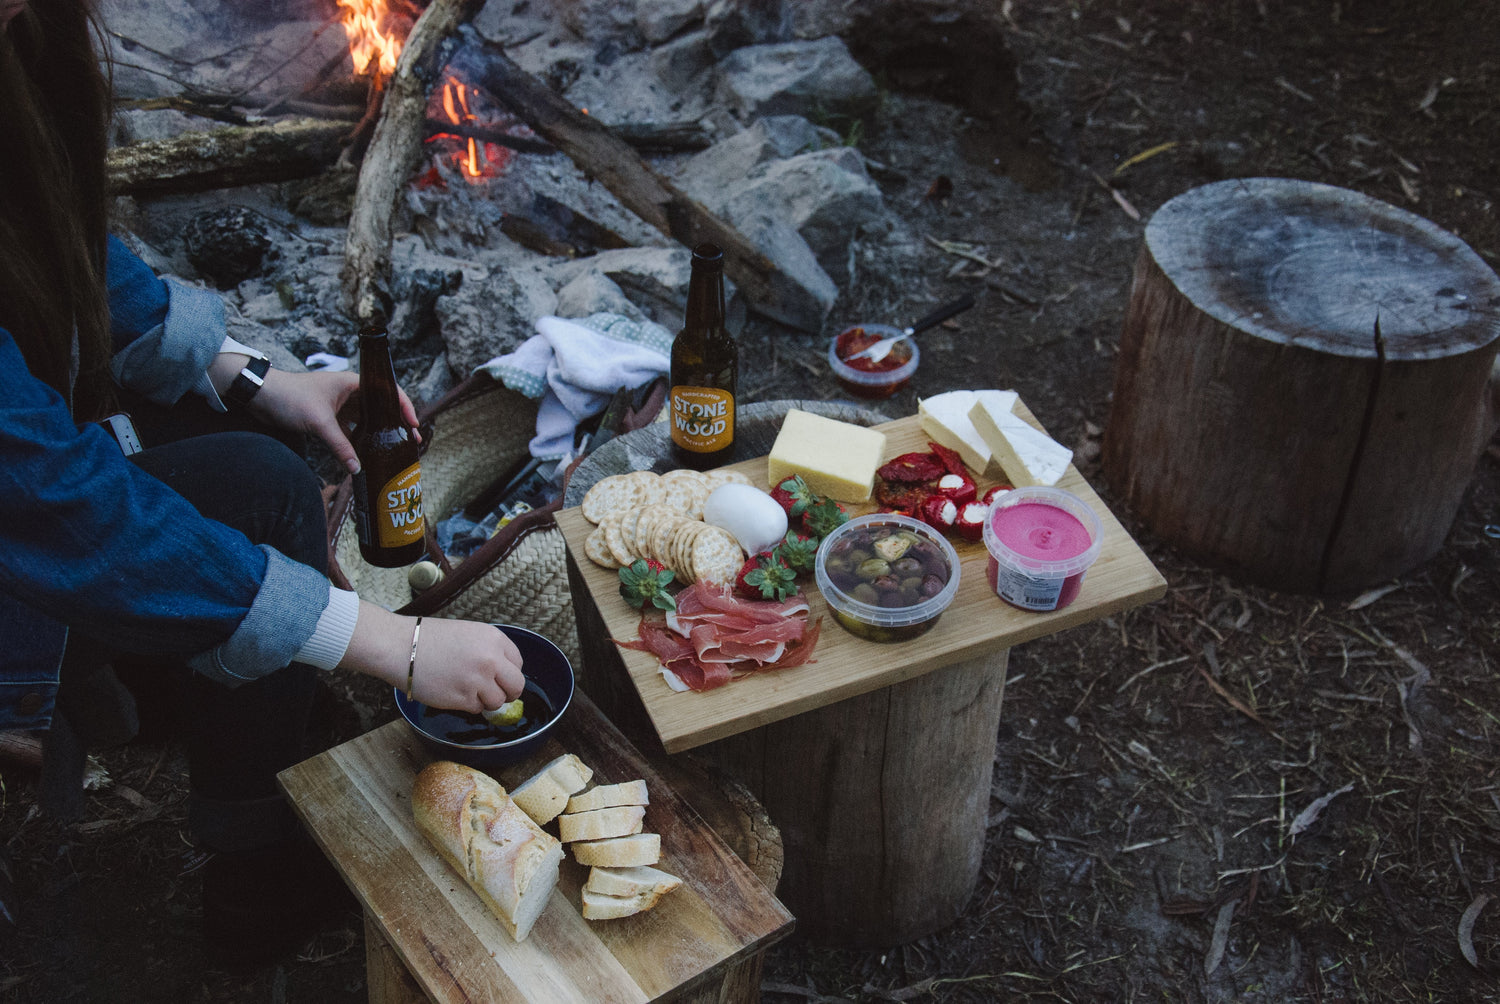 Storage Tips to Keep Food Safe When Camping